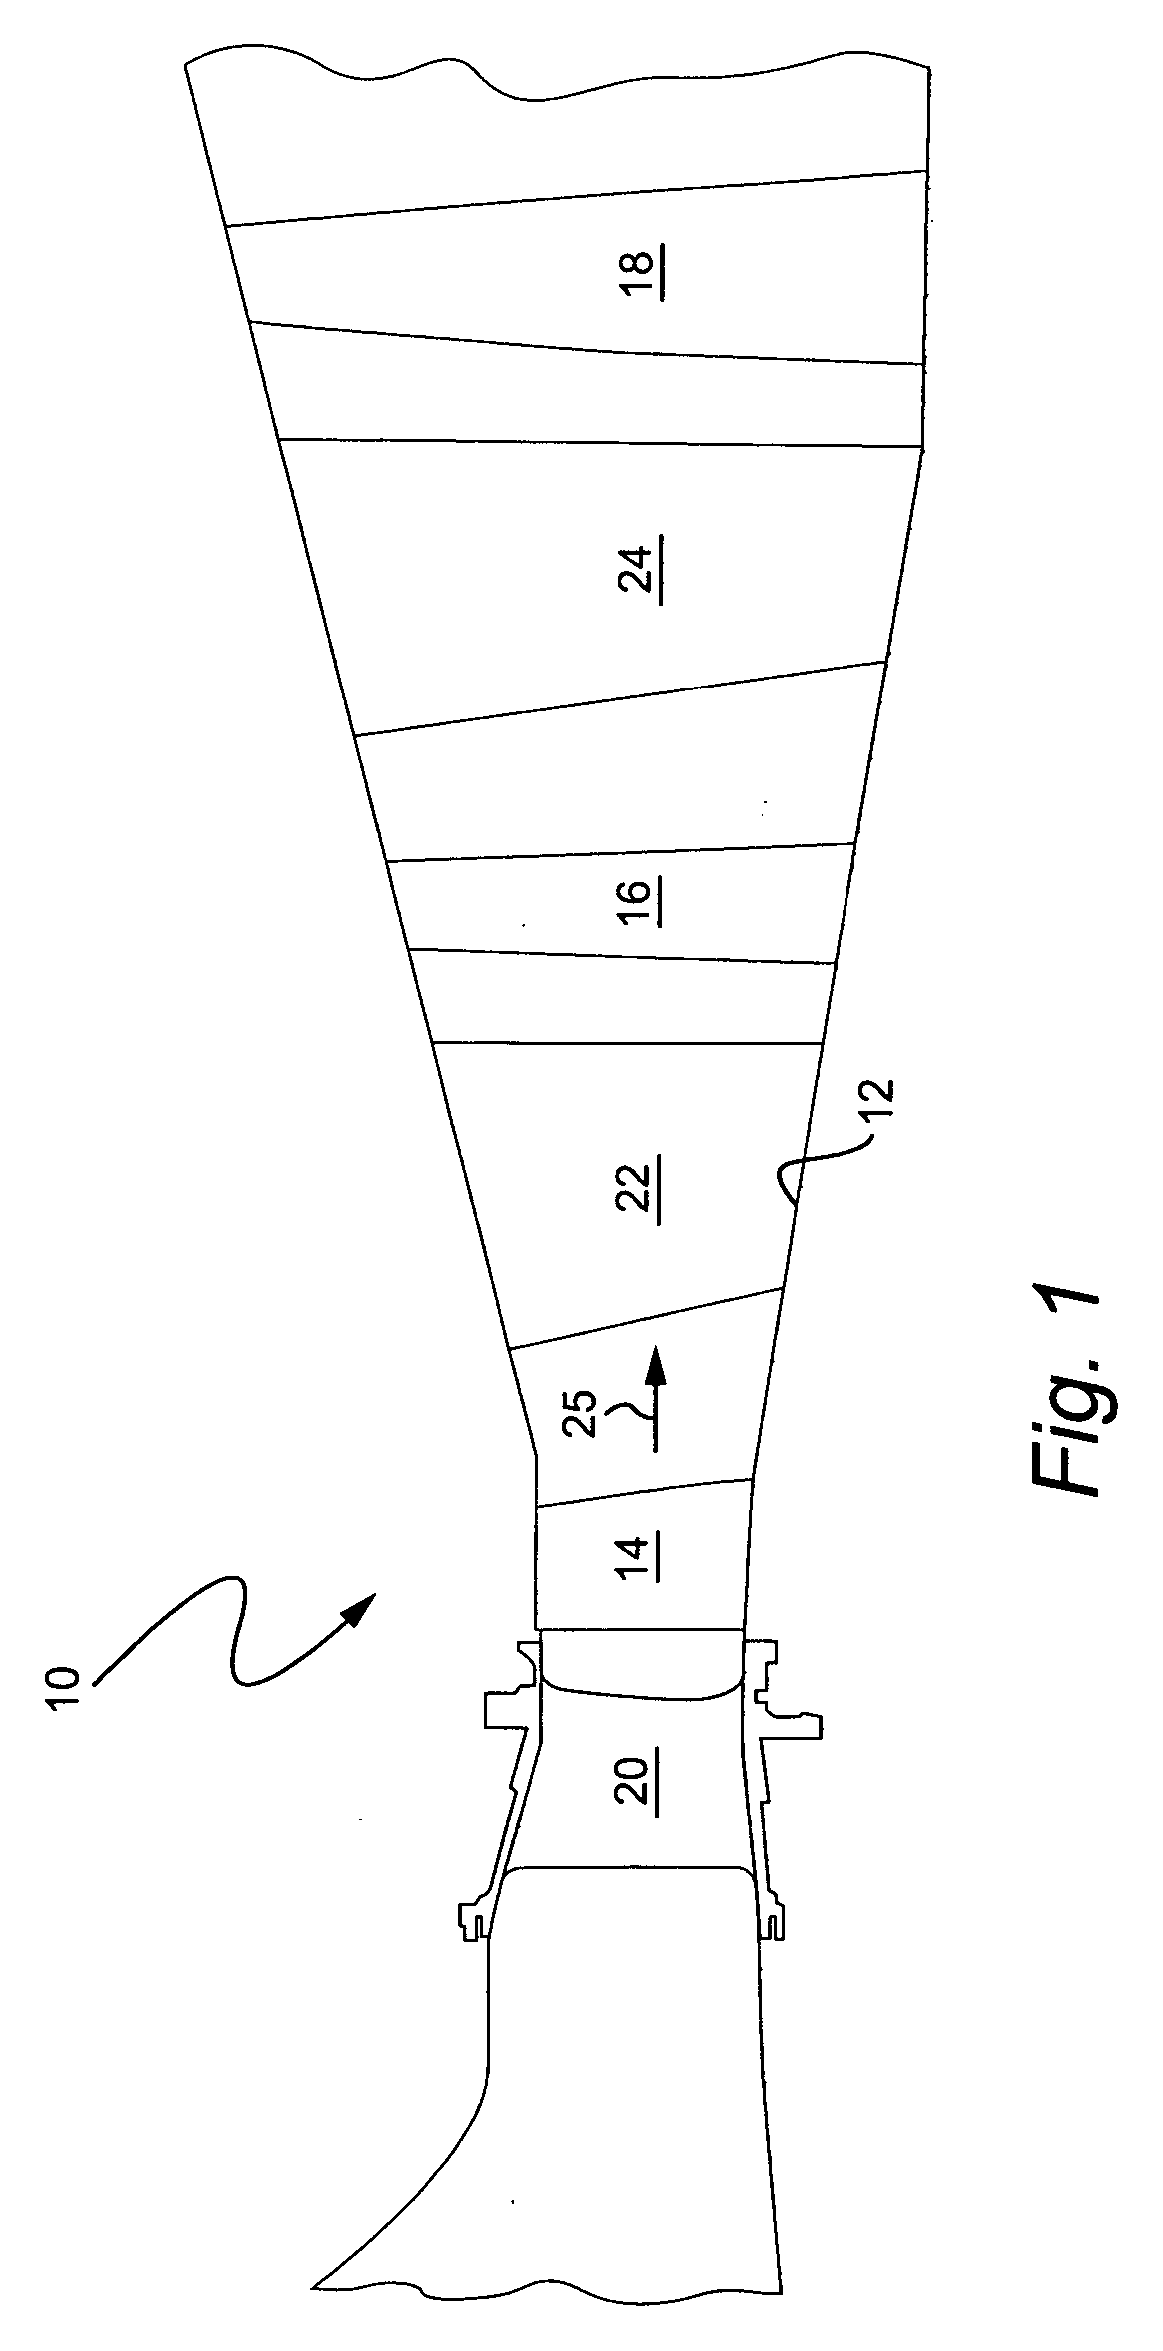 Airfoil shape and sidewall flowpath surfaces for a turbine nozzle